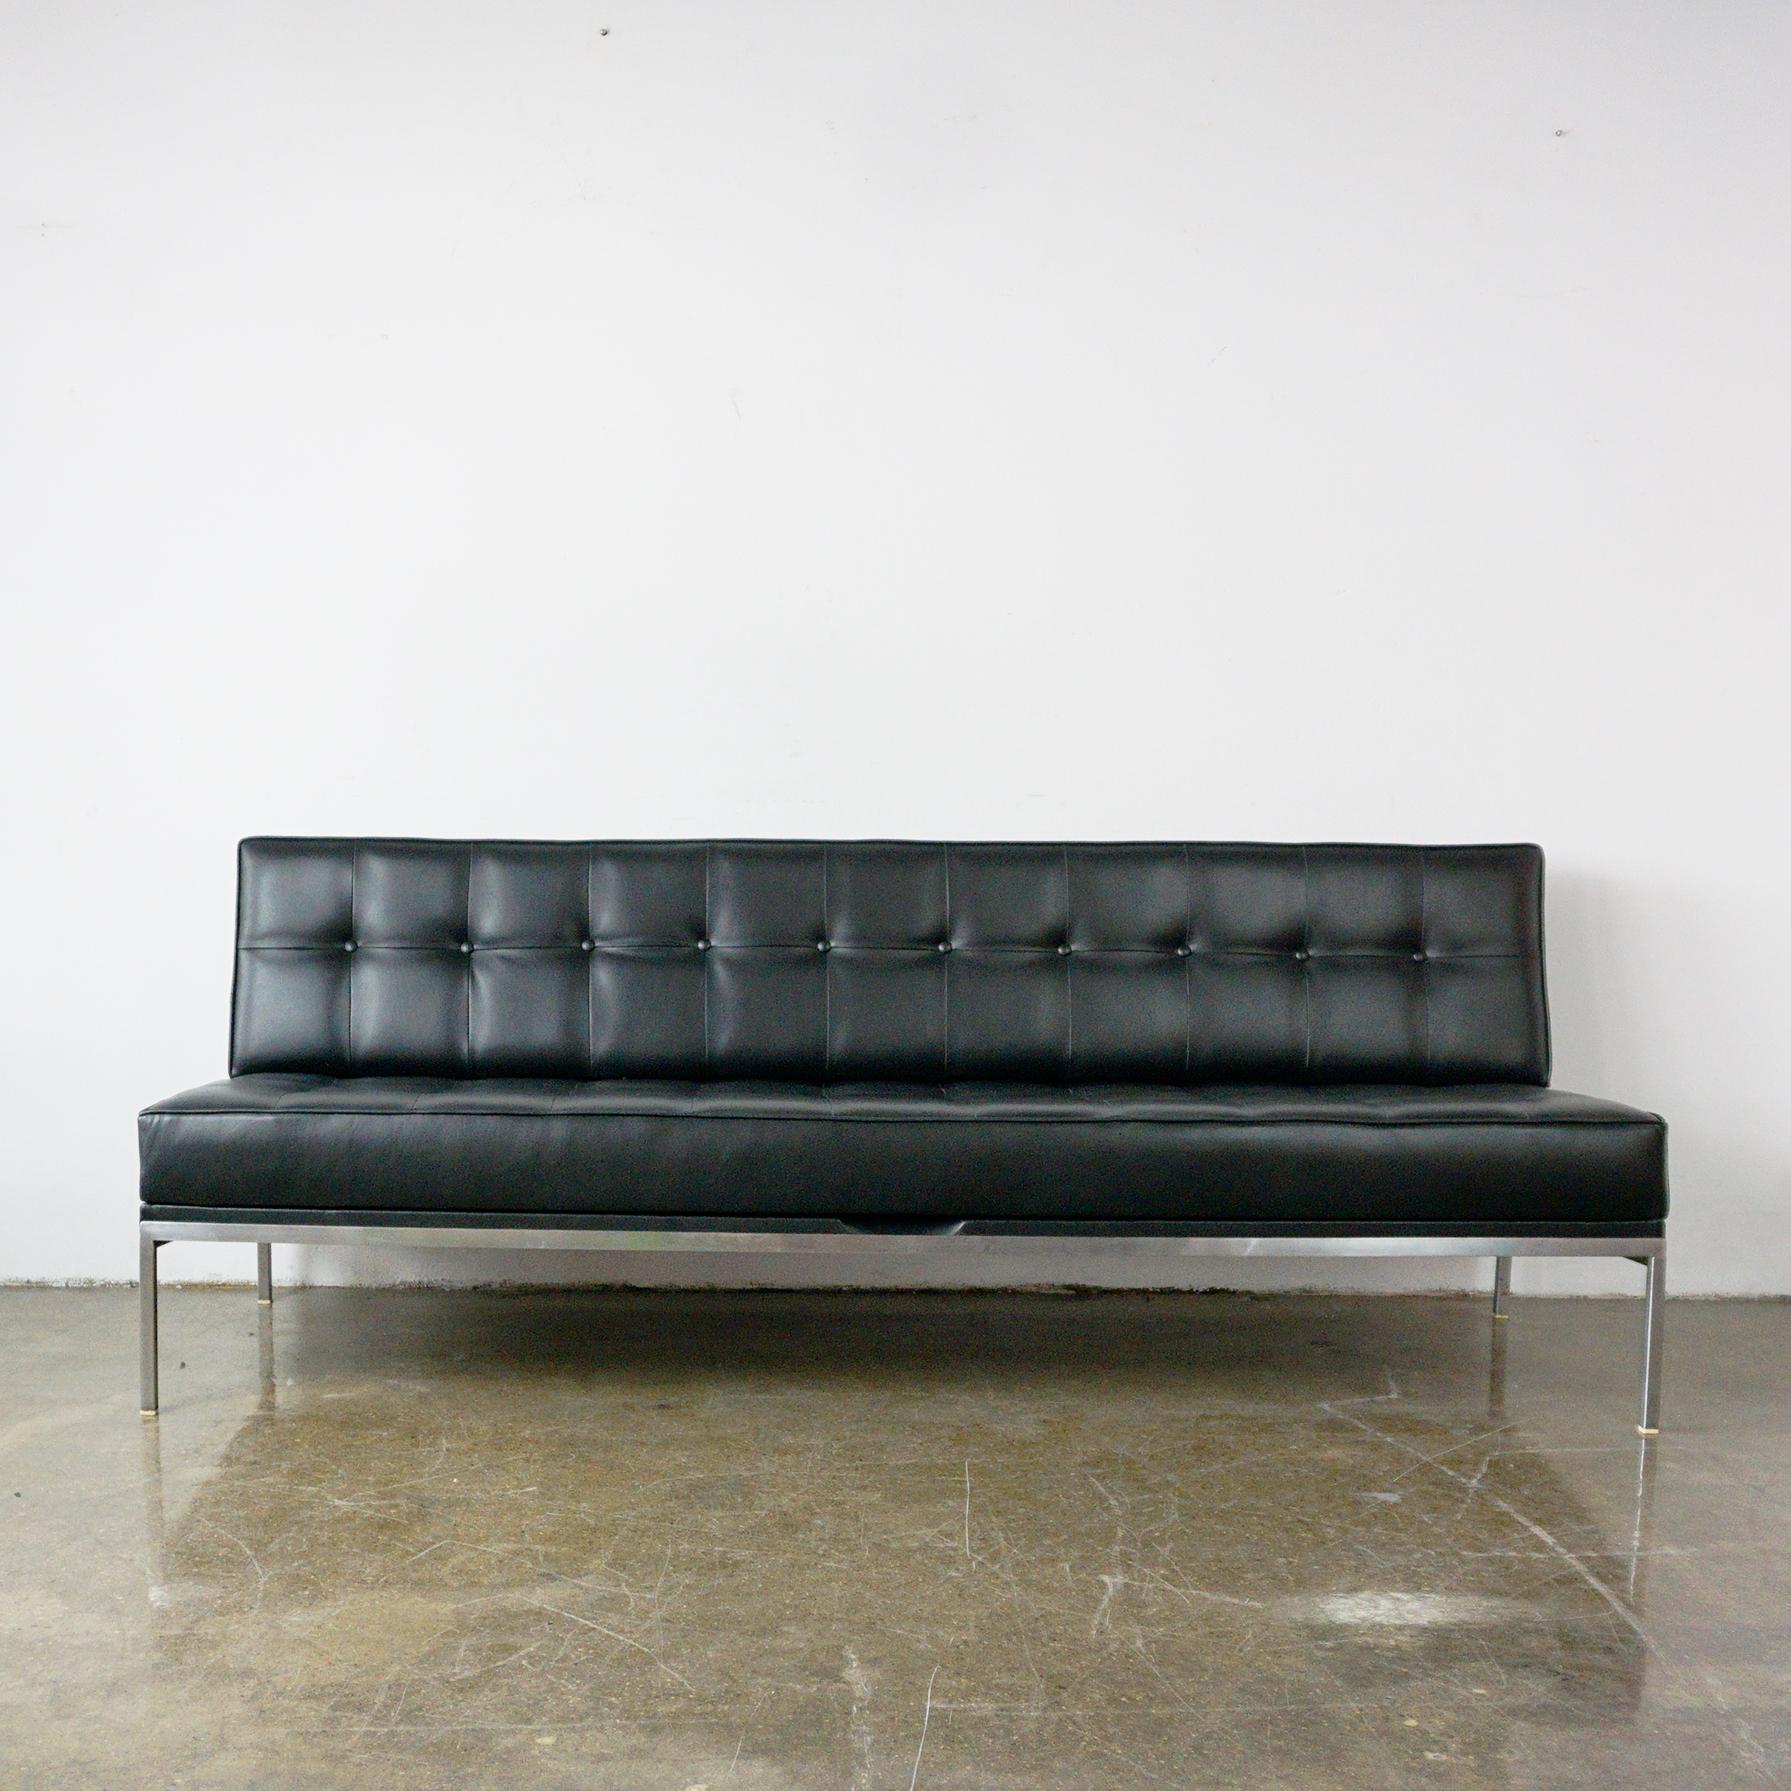 Mid-Century Modern Mid-Century Black Leather Sofa or Daybed by Johannes Spalt for Wittmann Austria